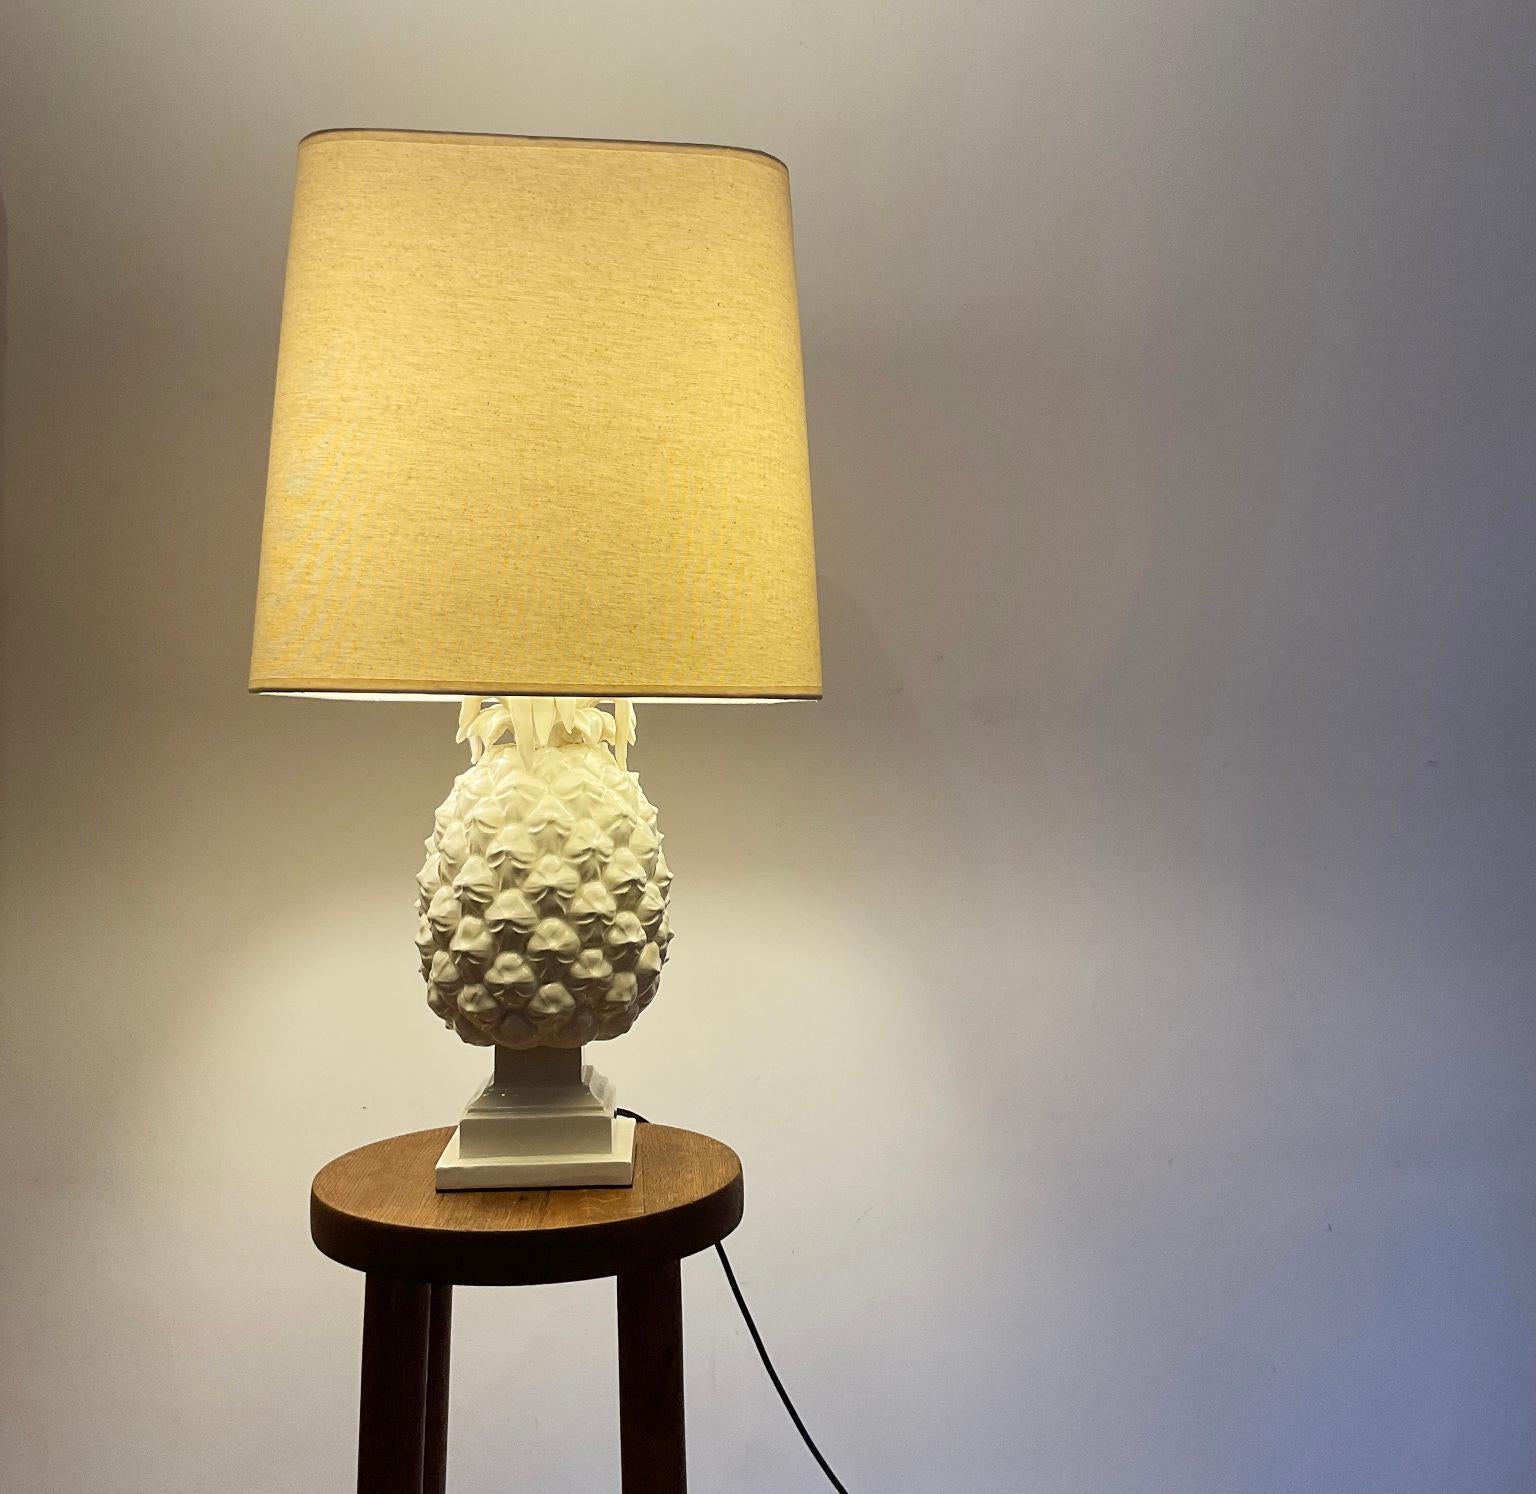 Pineapple Table Lamp in White Glazed Ceramic from Italy 1970s For Sale 1